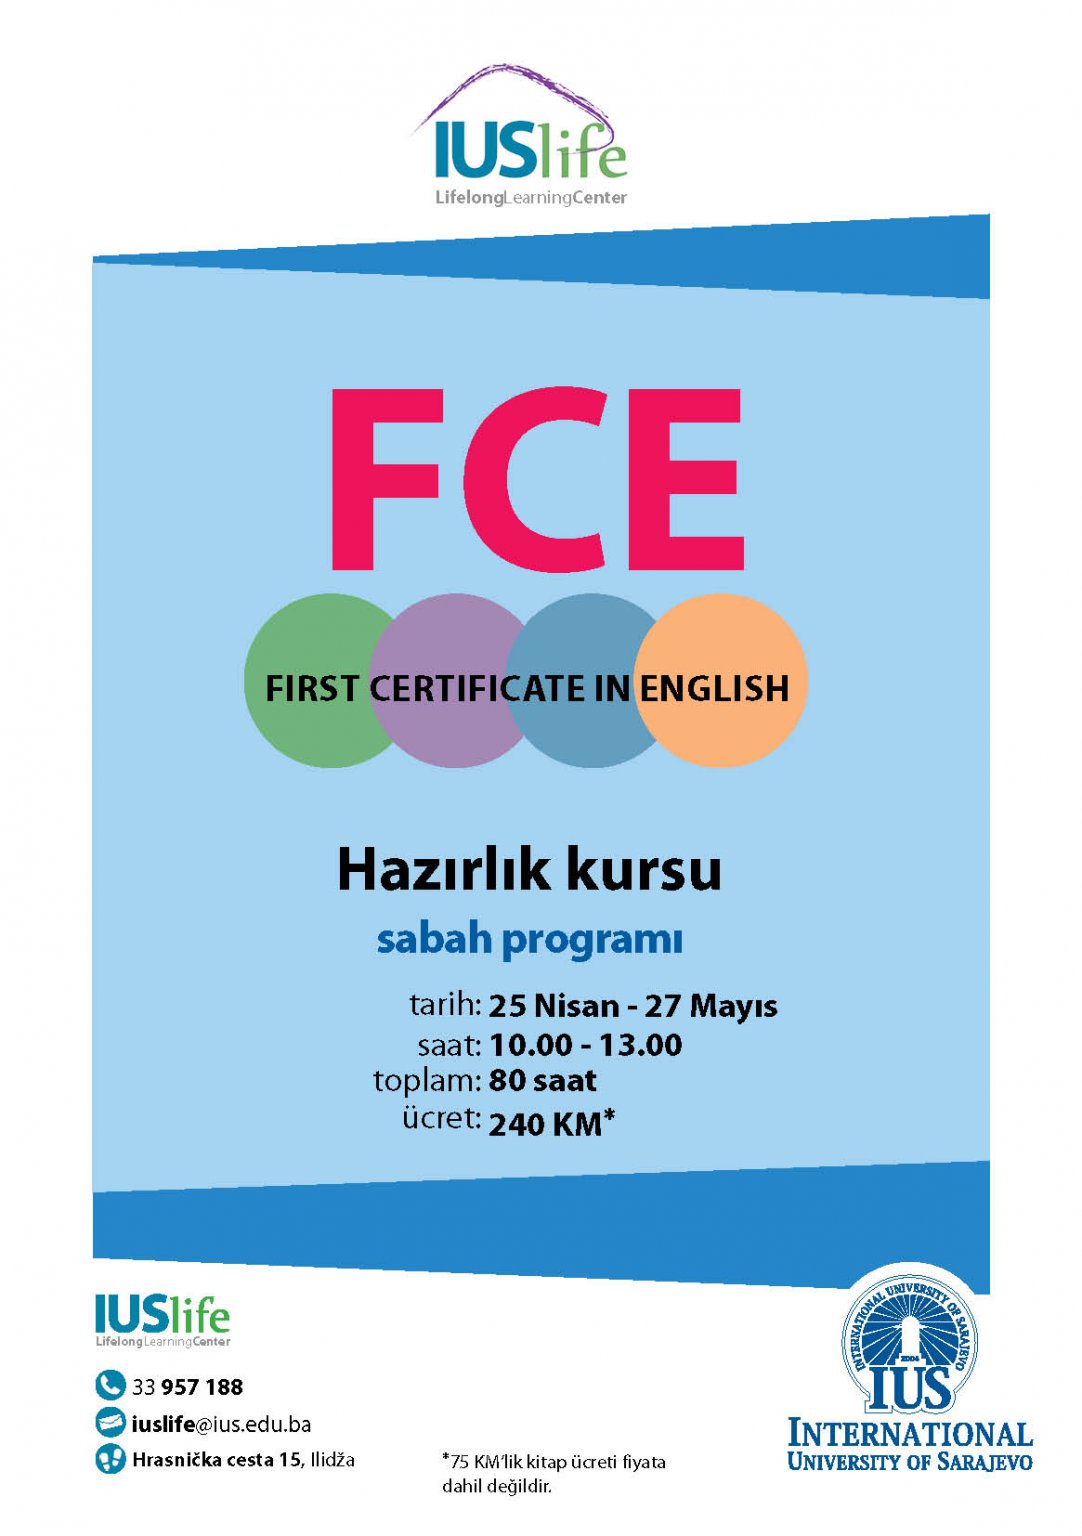  Morning Program: "First Certificate in English" 